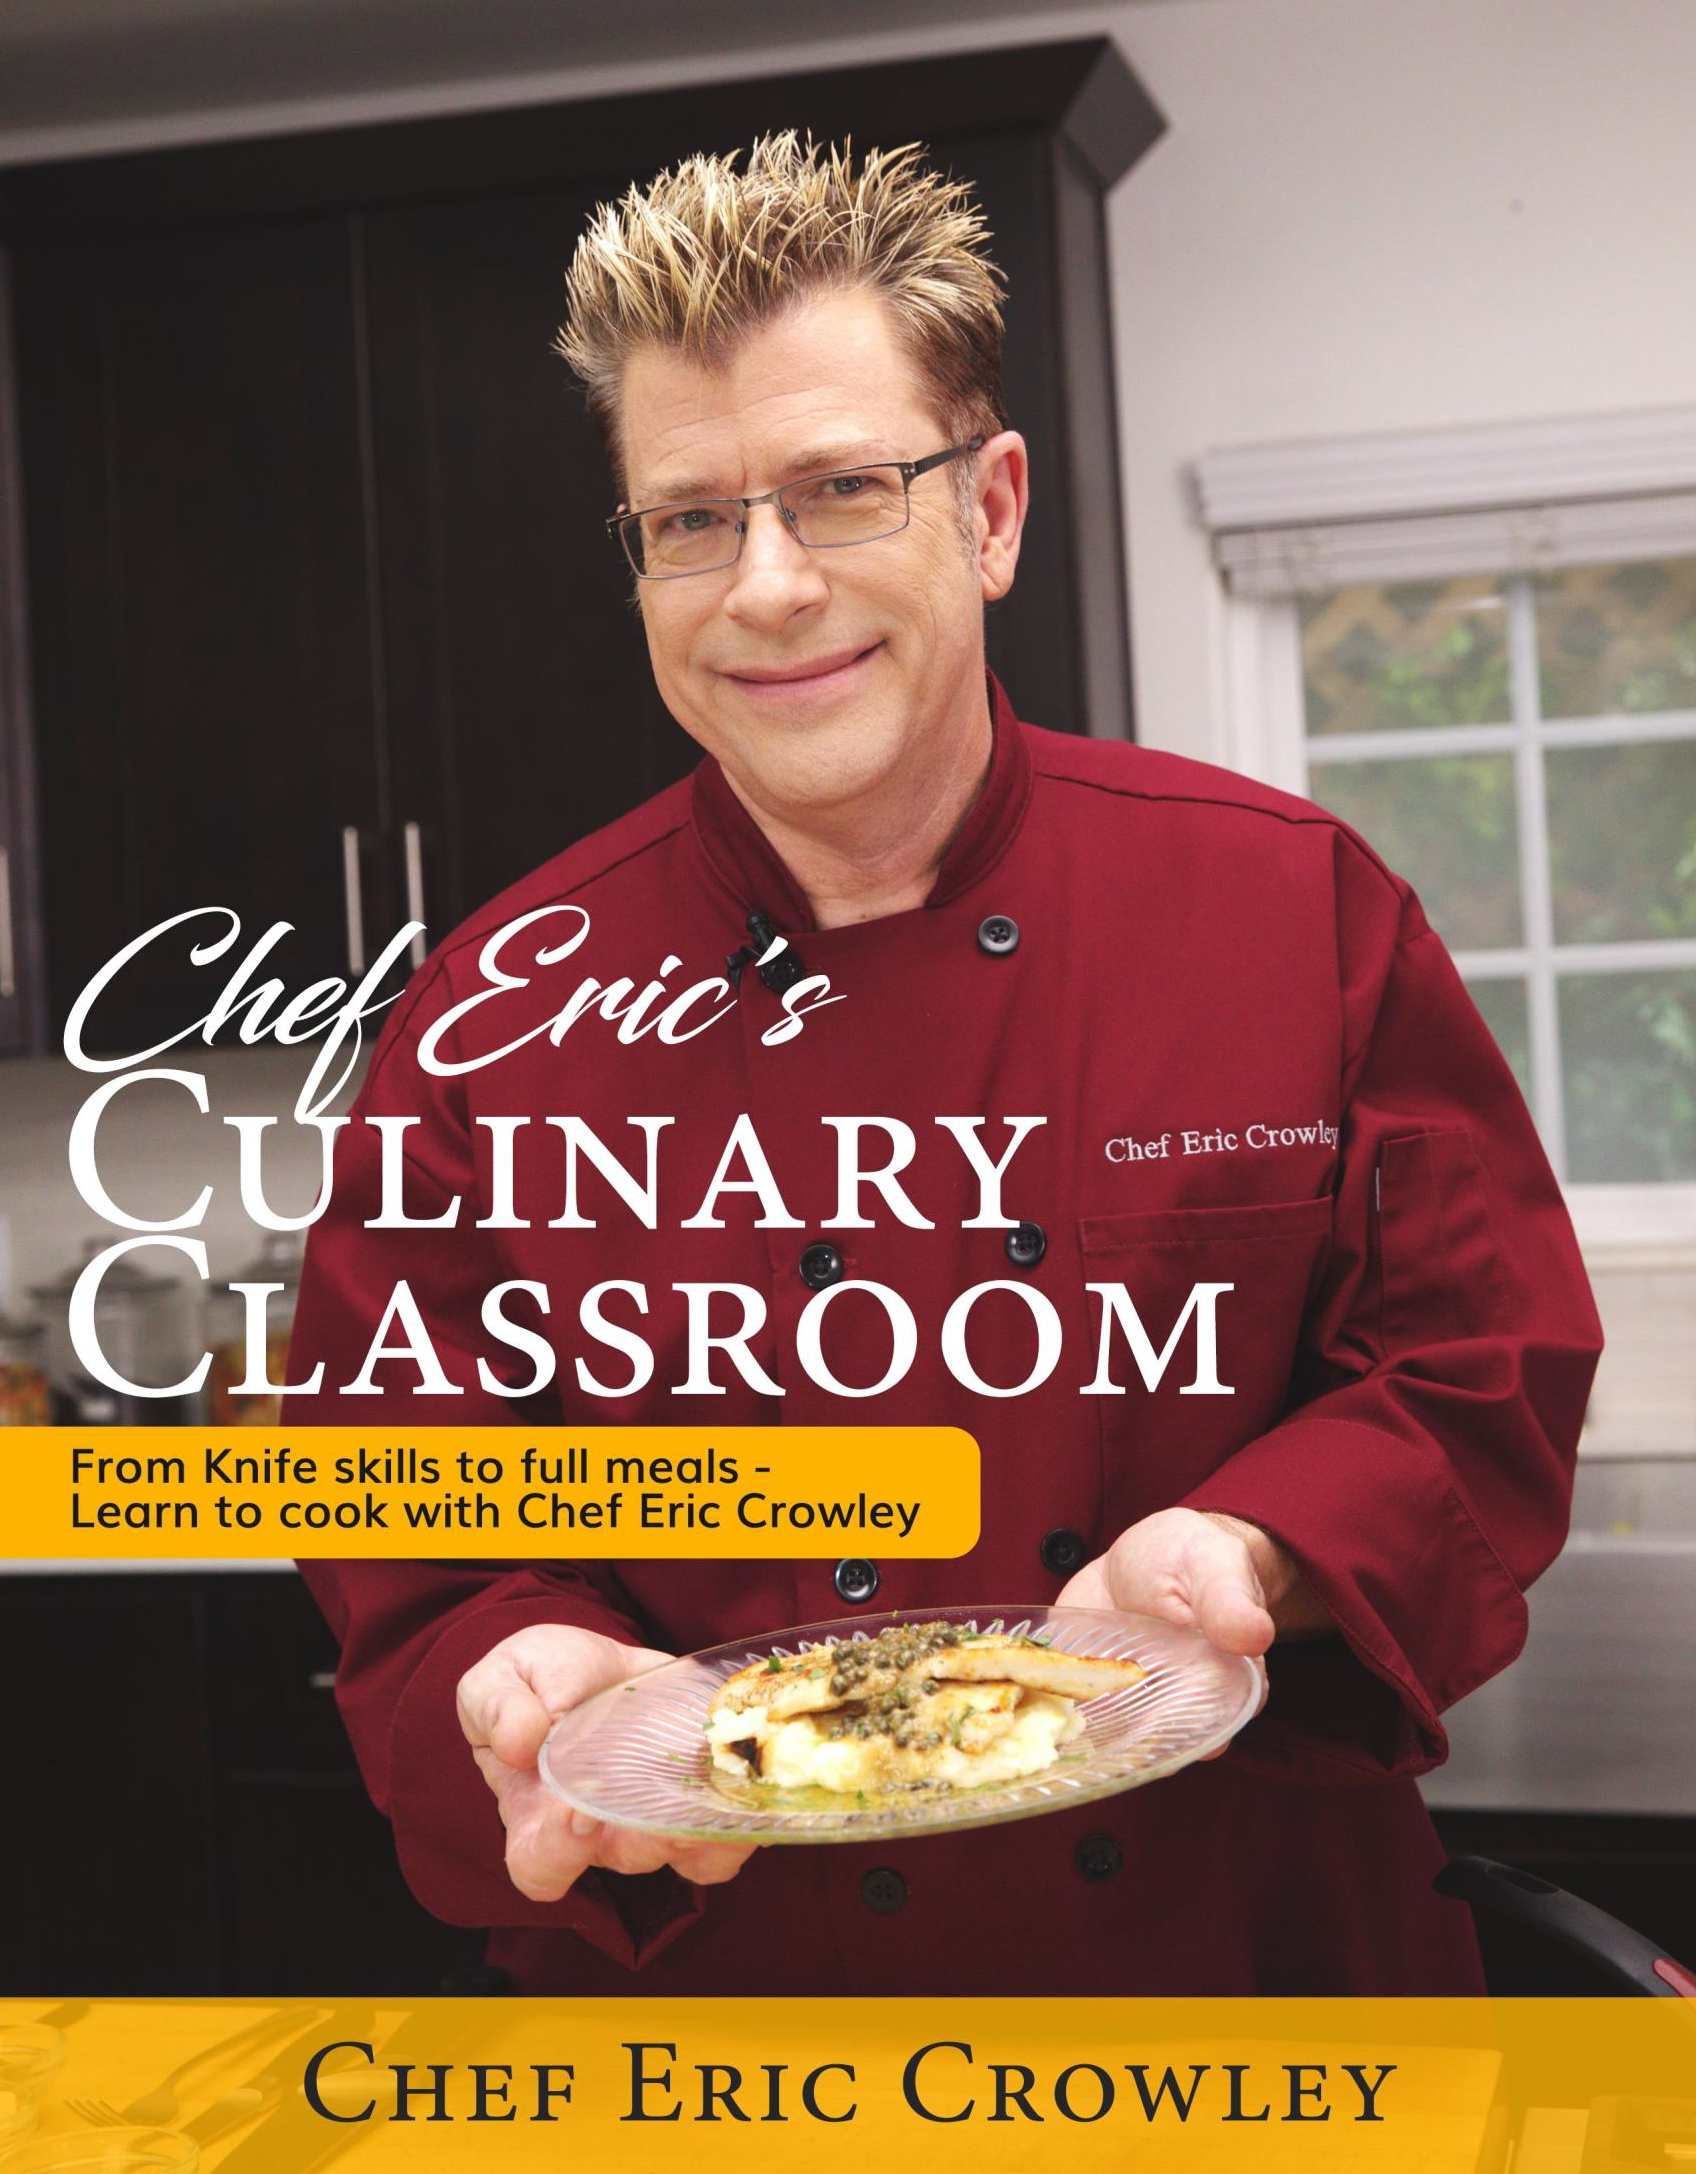 Book cover of the PDF book that comes with the video cooking course.